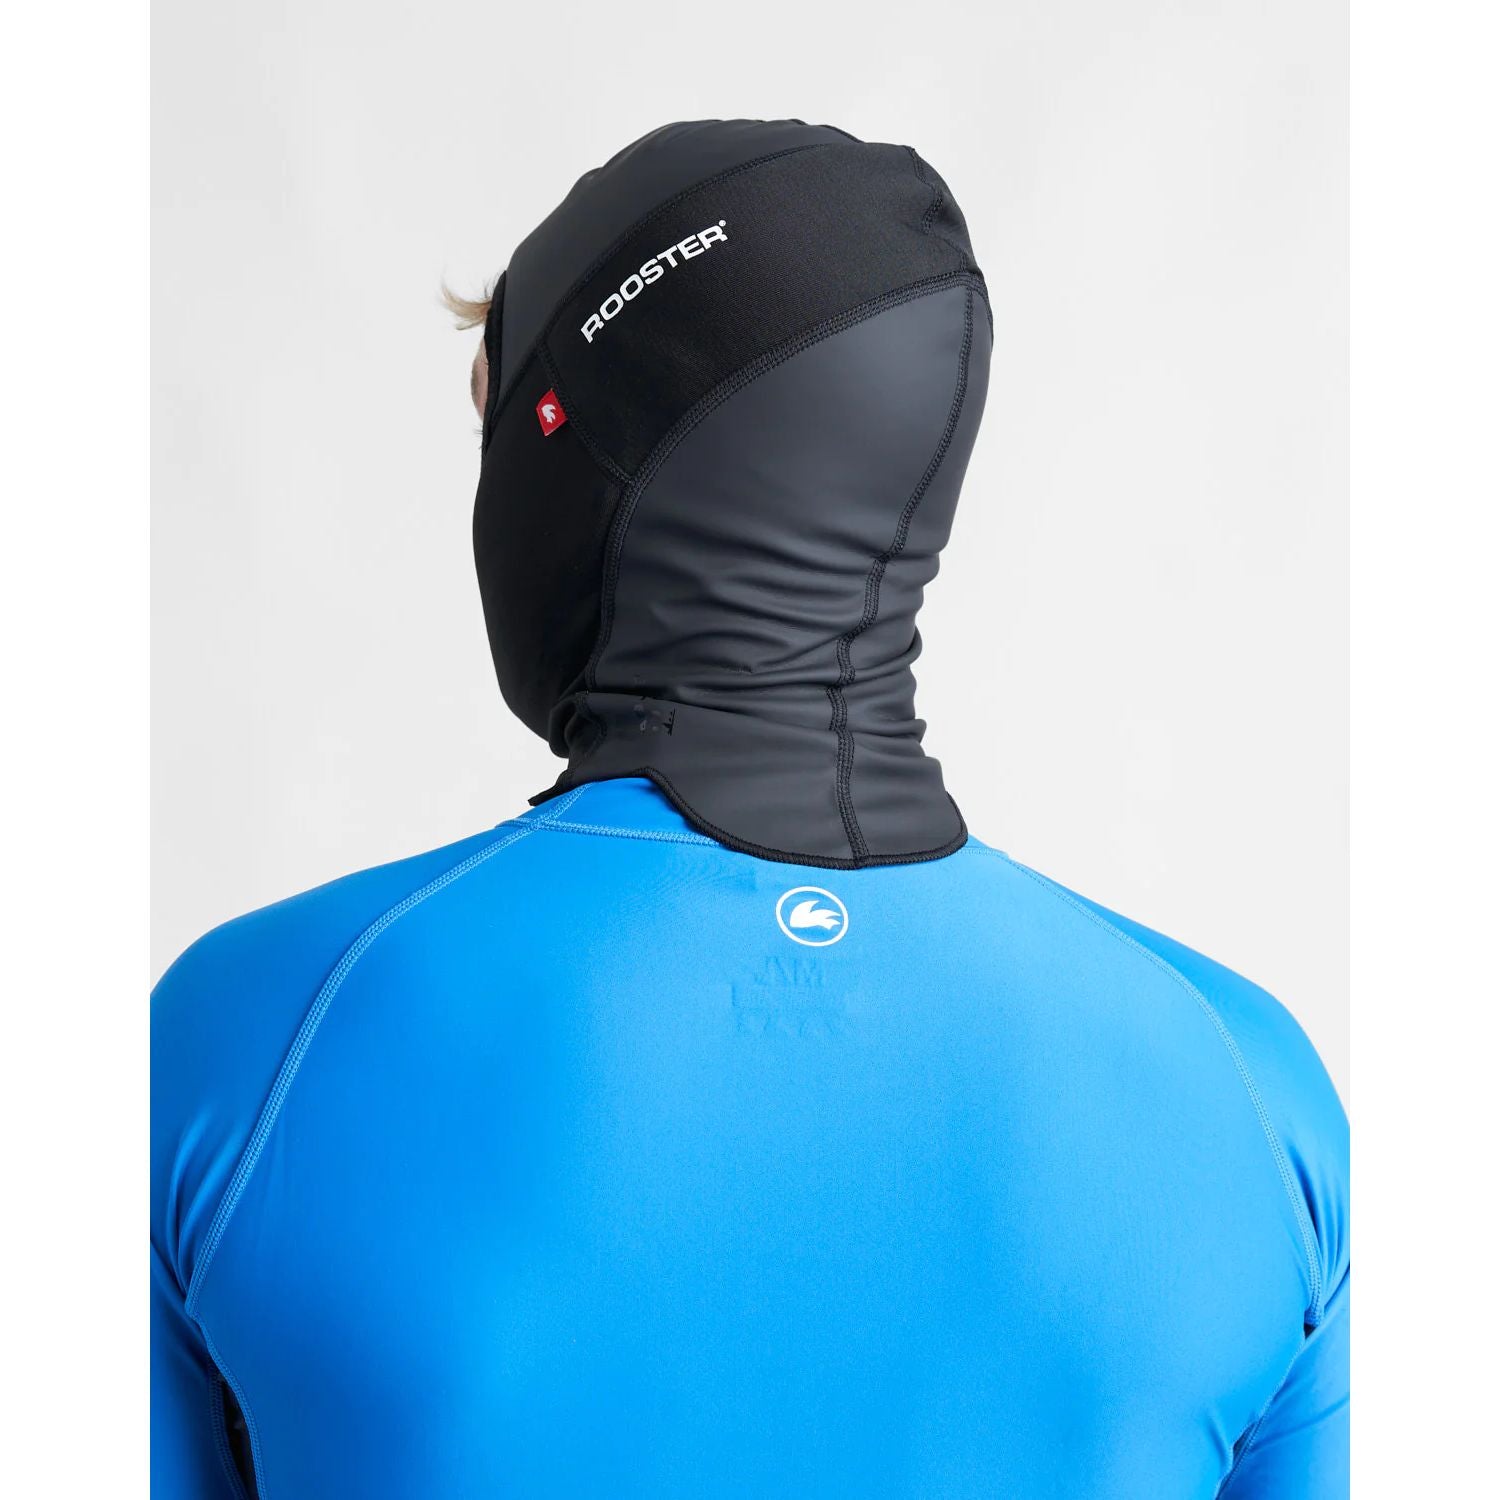 Rooster PolyPro Balaclava